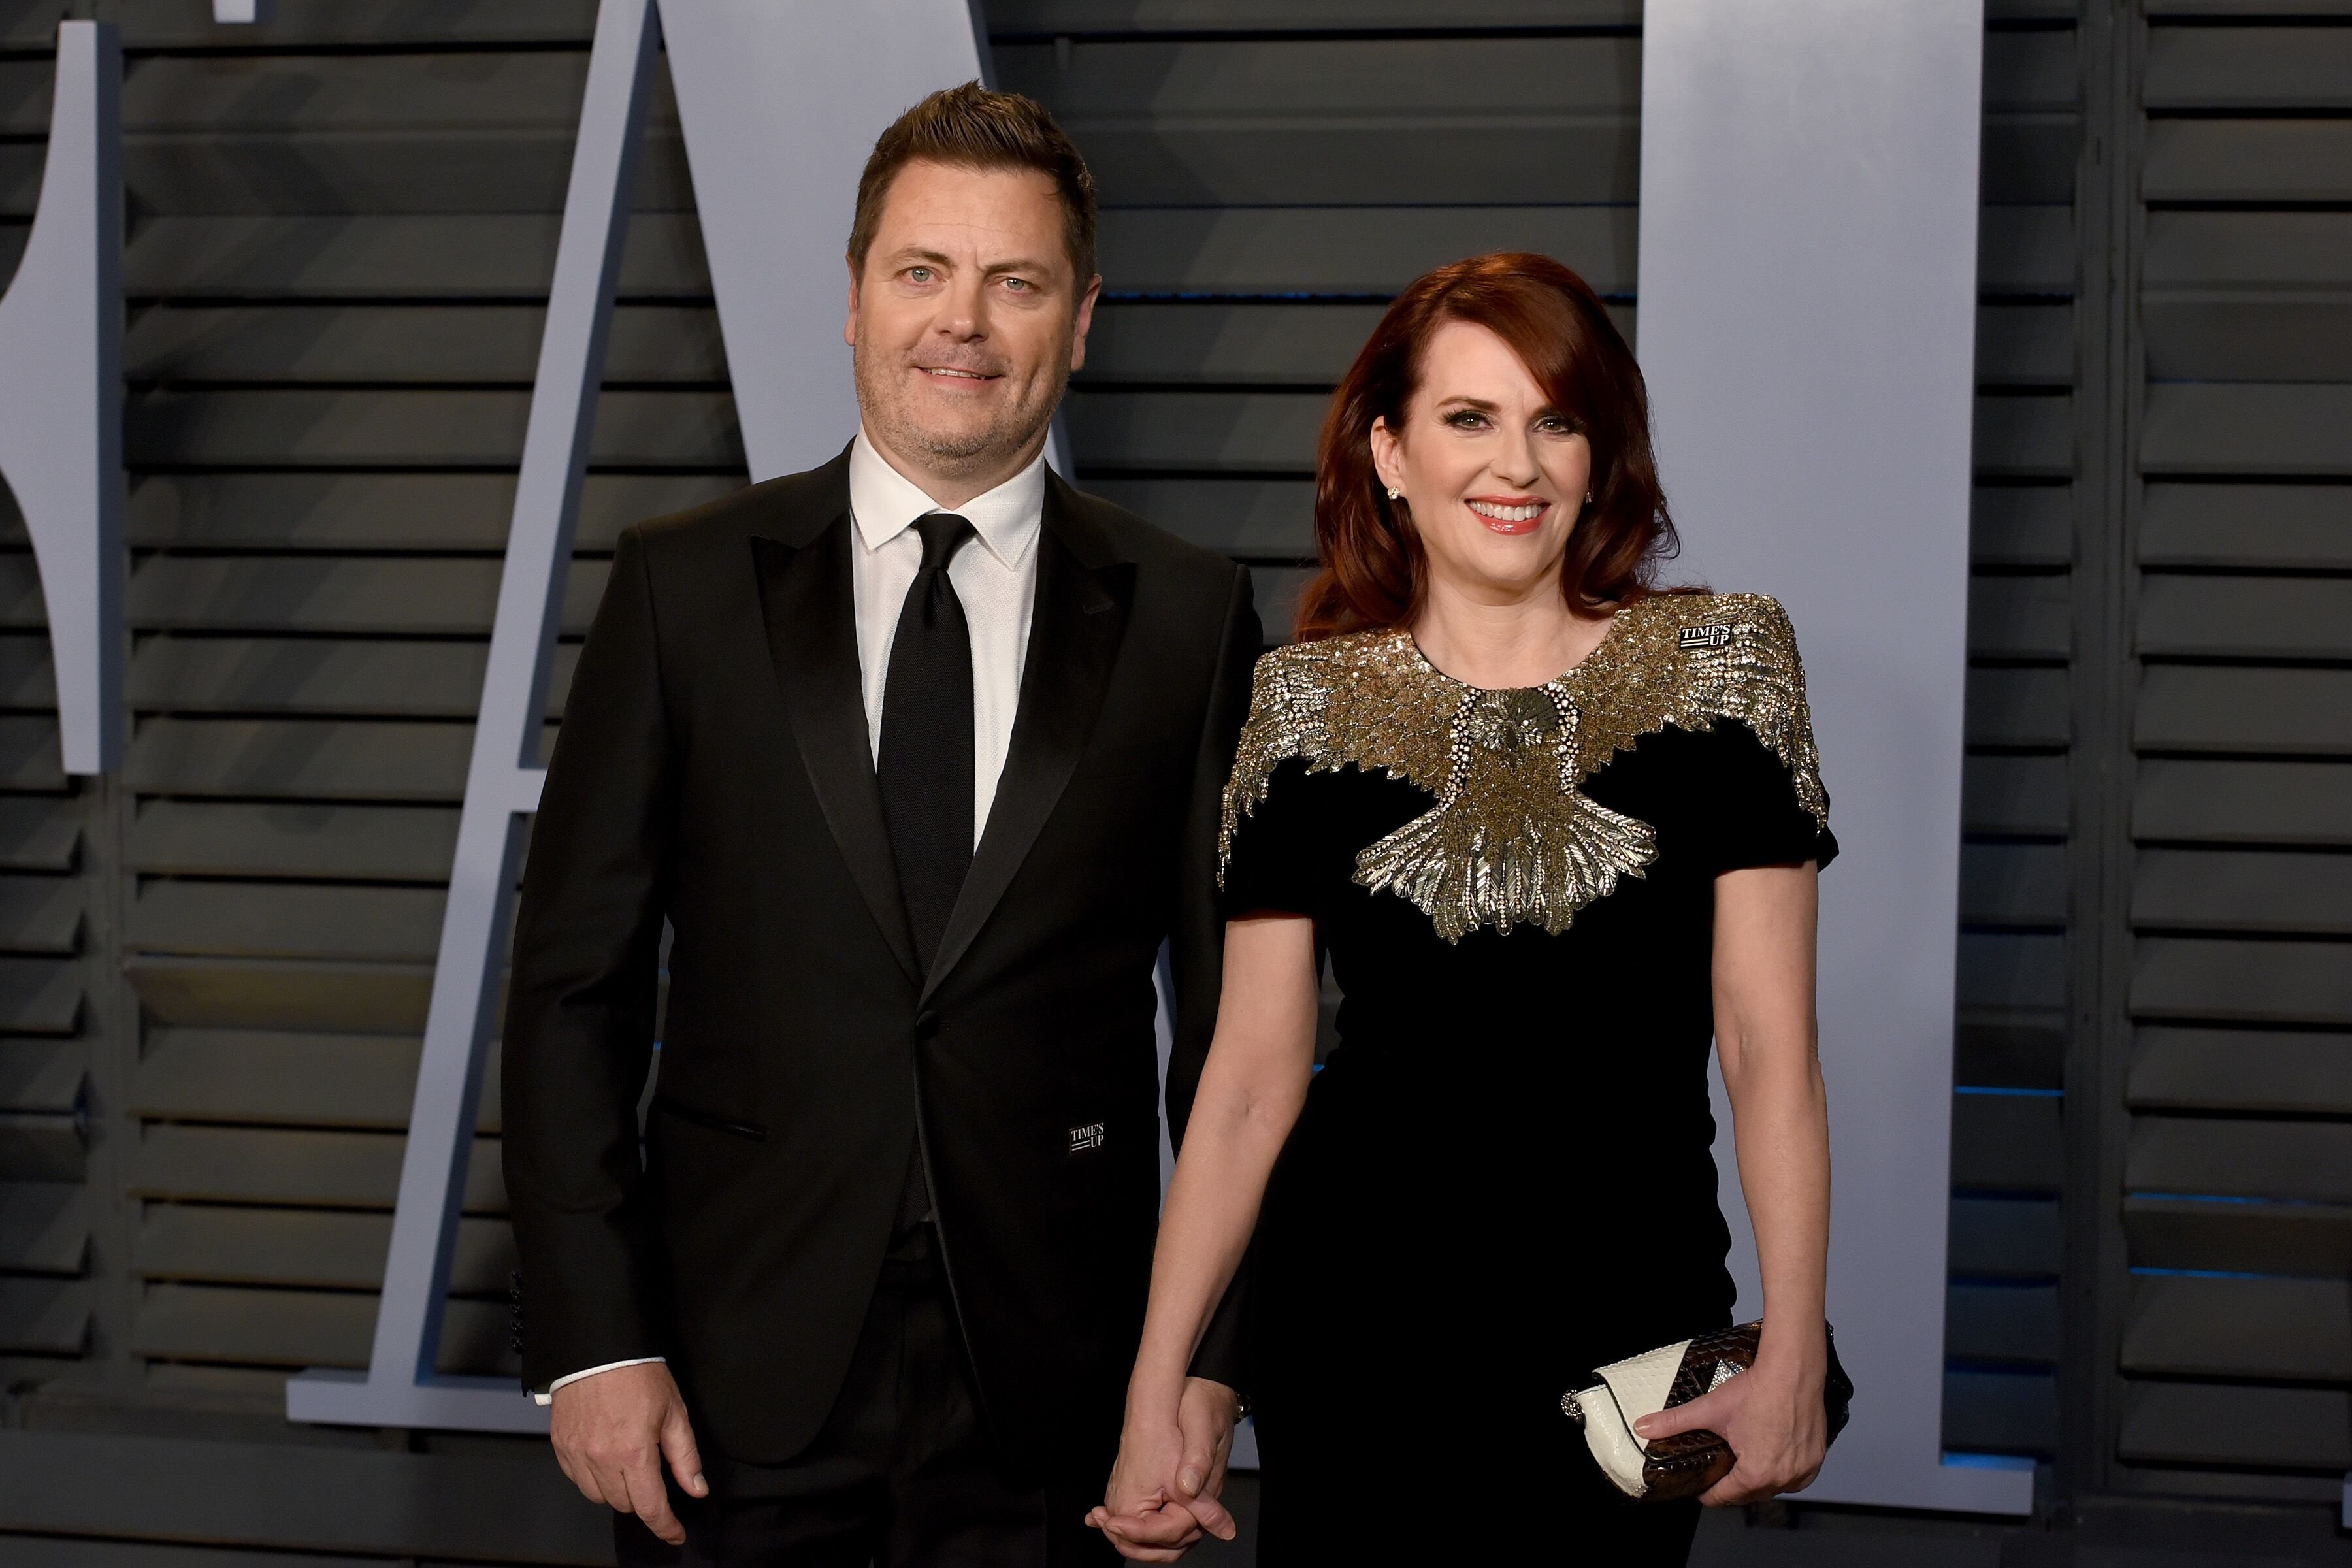  Nick Offerman and Megan Mullally attend the 2018 Vanity Fair Oscar Party in Los Angeles | Source: Getty Images